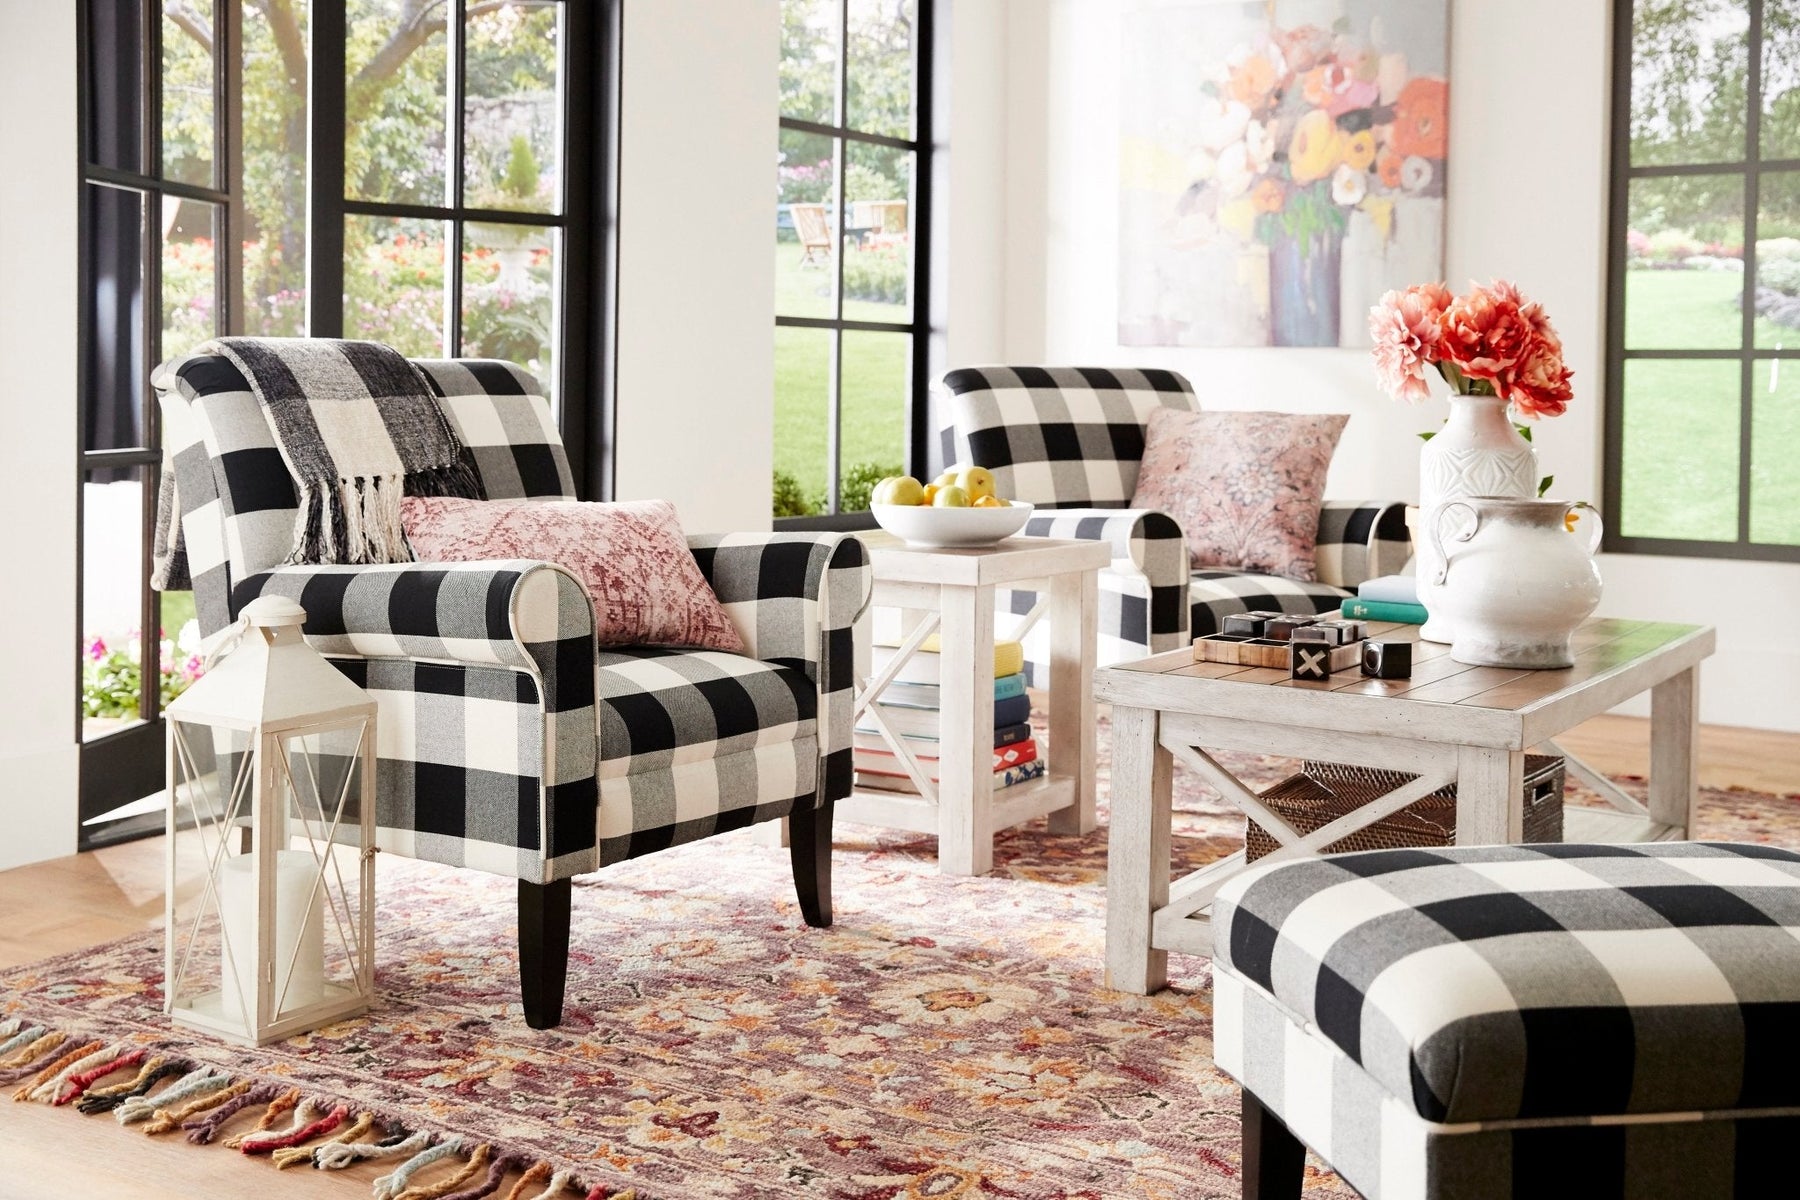 How To Style a Showy Statement Chair - Pier 1